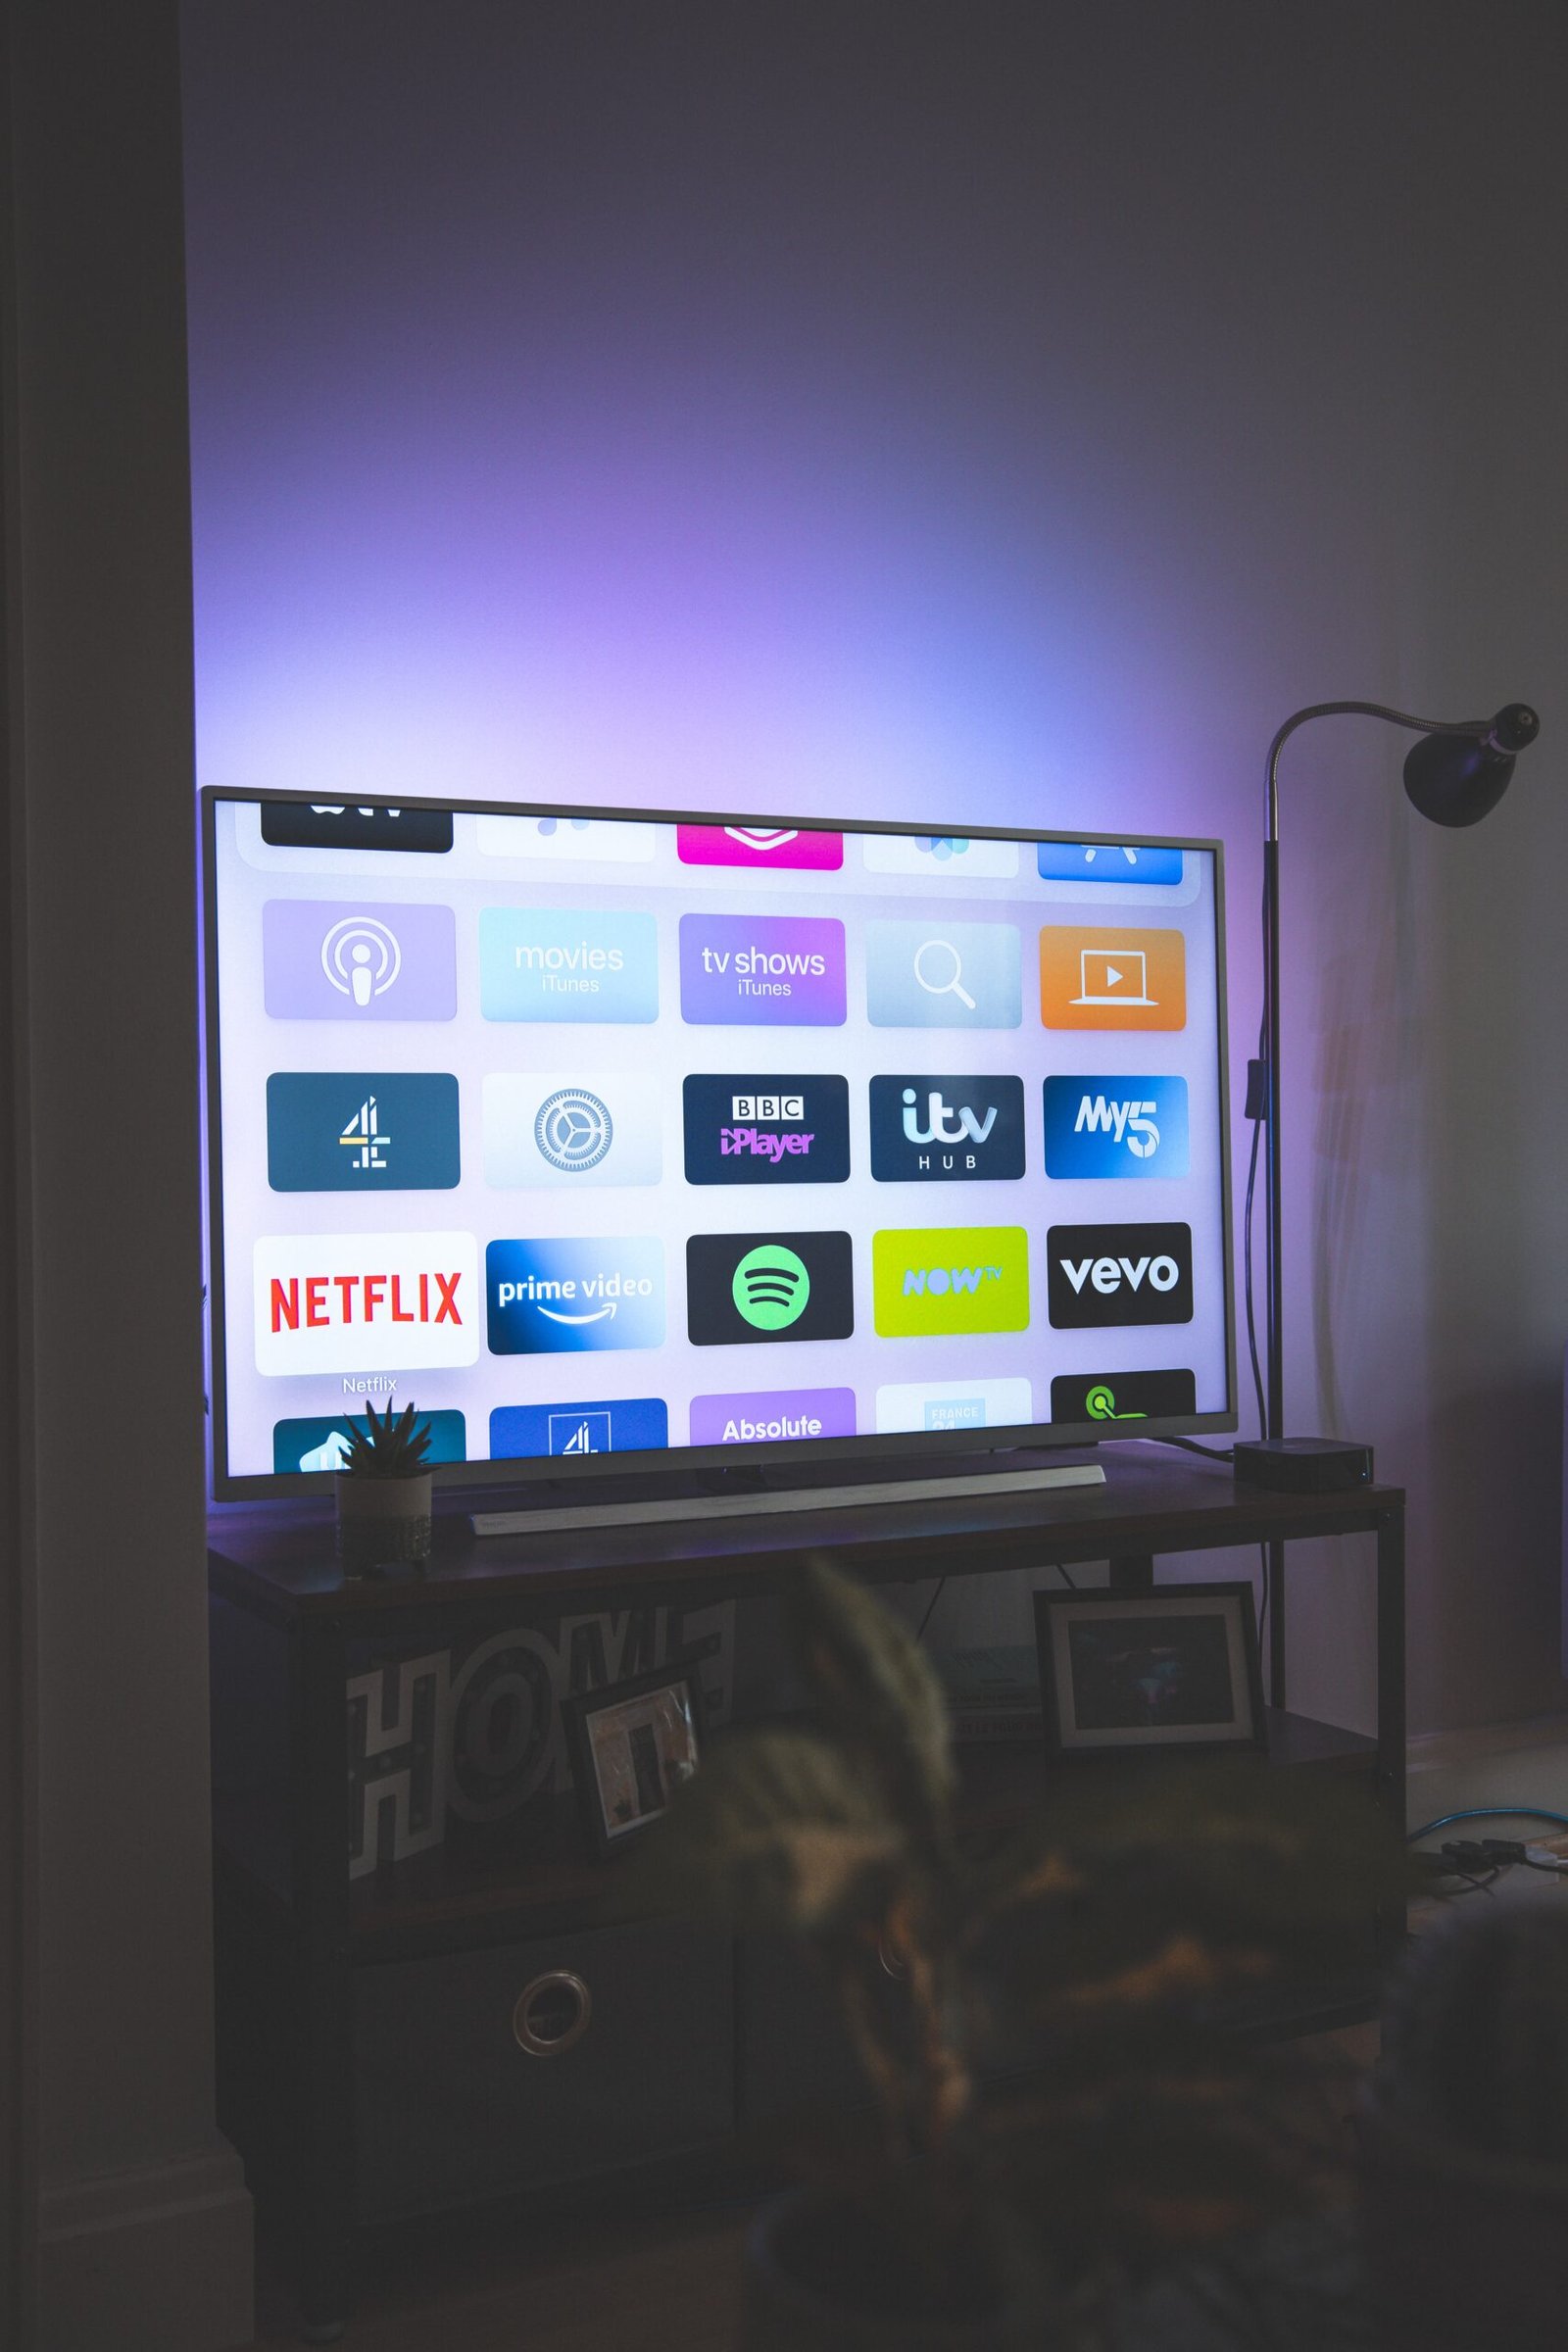 Streaming Live TV and The 1 Ultimate Guide to cut the cord!